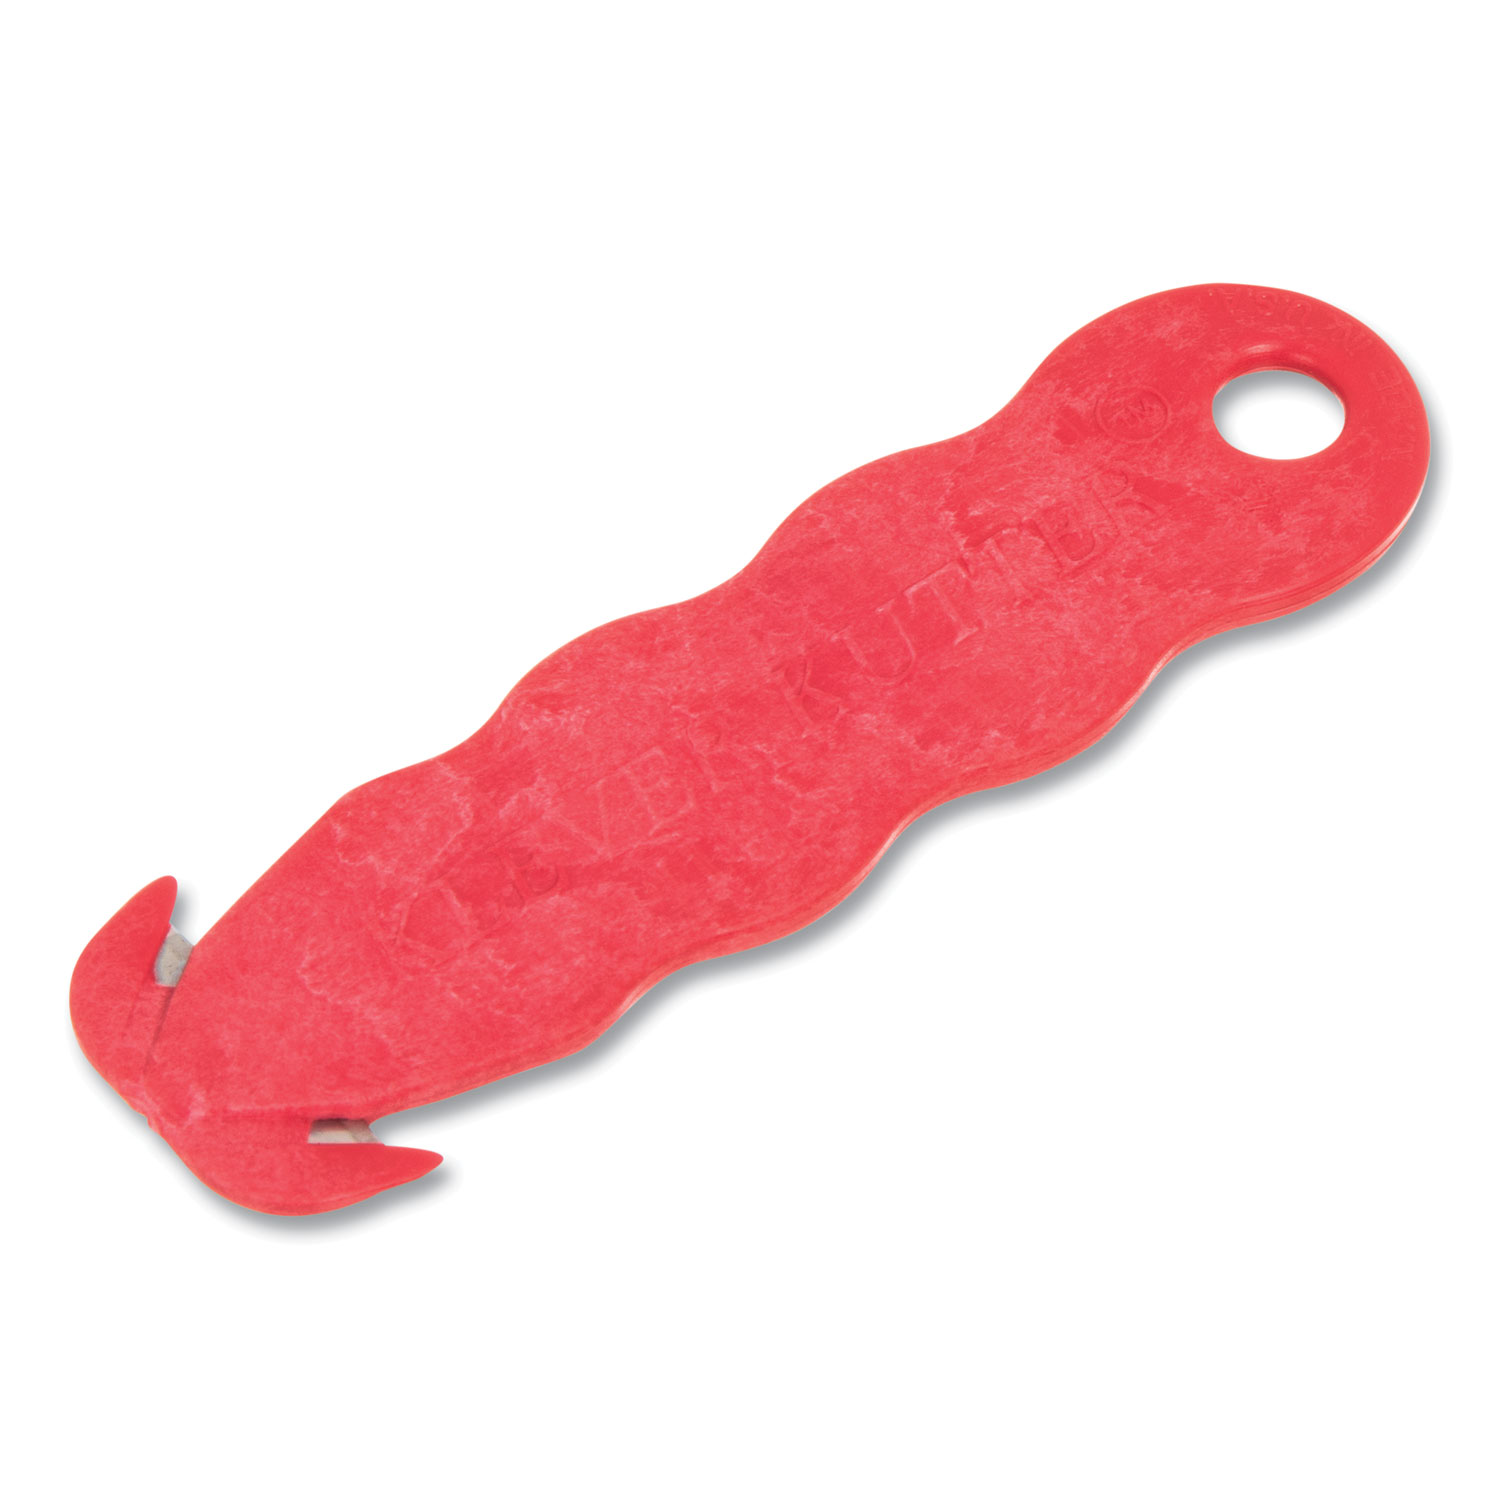 Klever Kutter Safety Cutter, 3 Razor Blades, 1 Blade, 4 Plastic Handle,  Red - BOSS Office and Computer Products